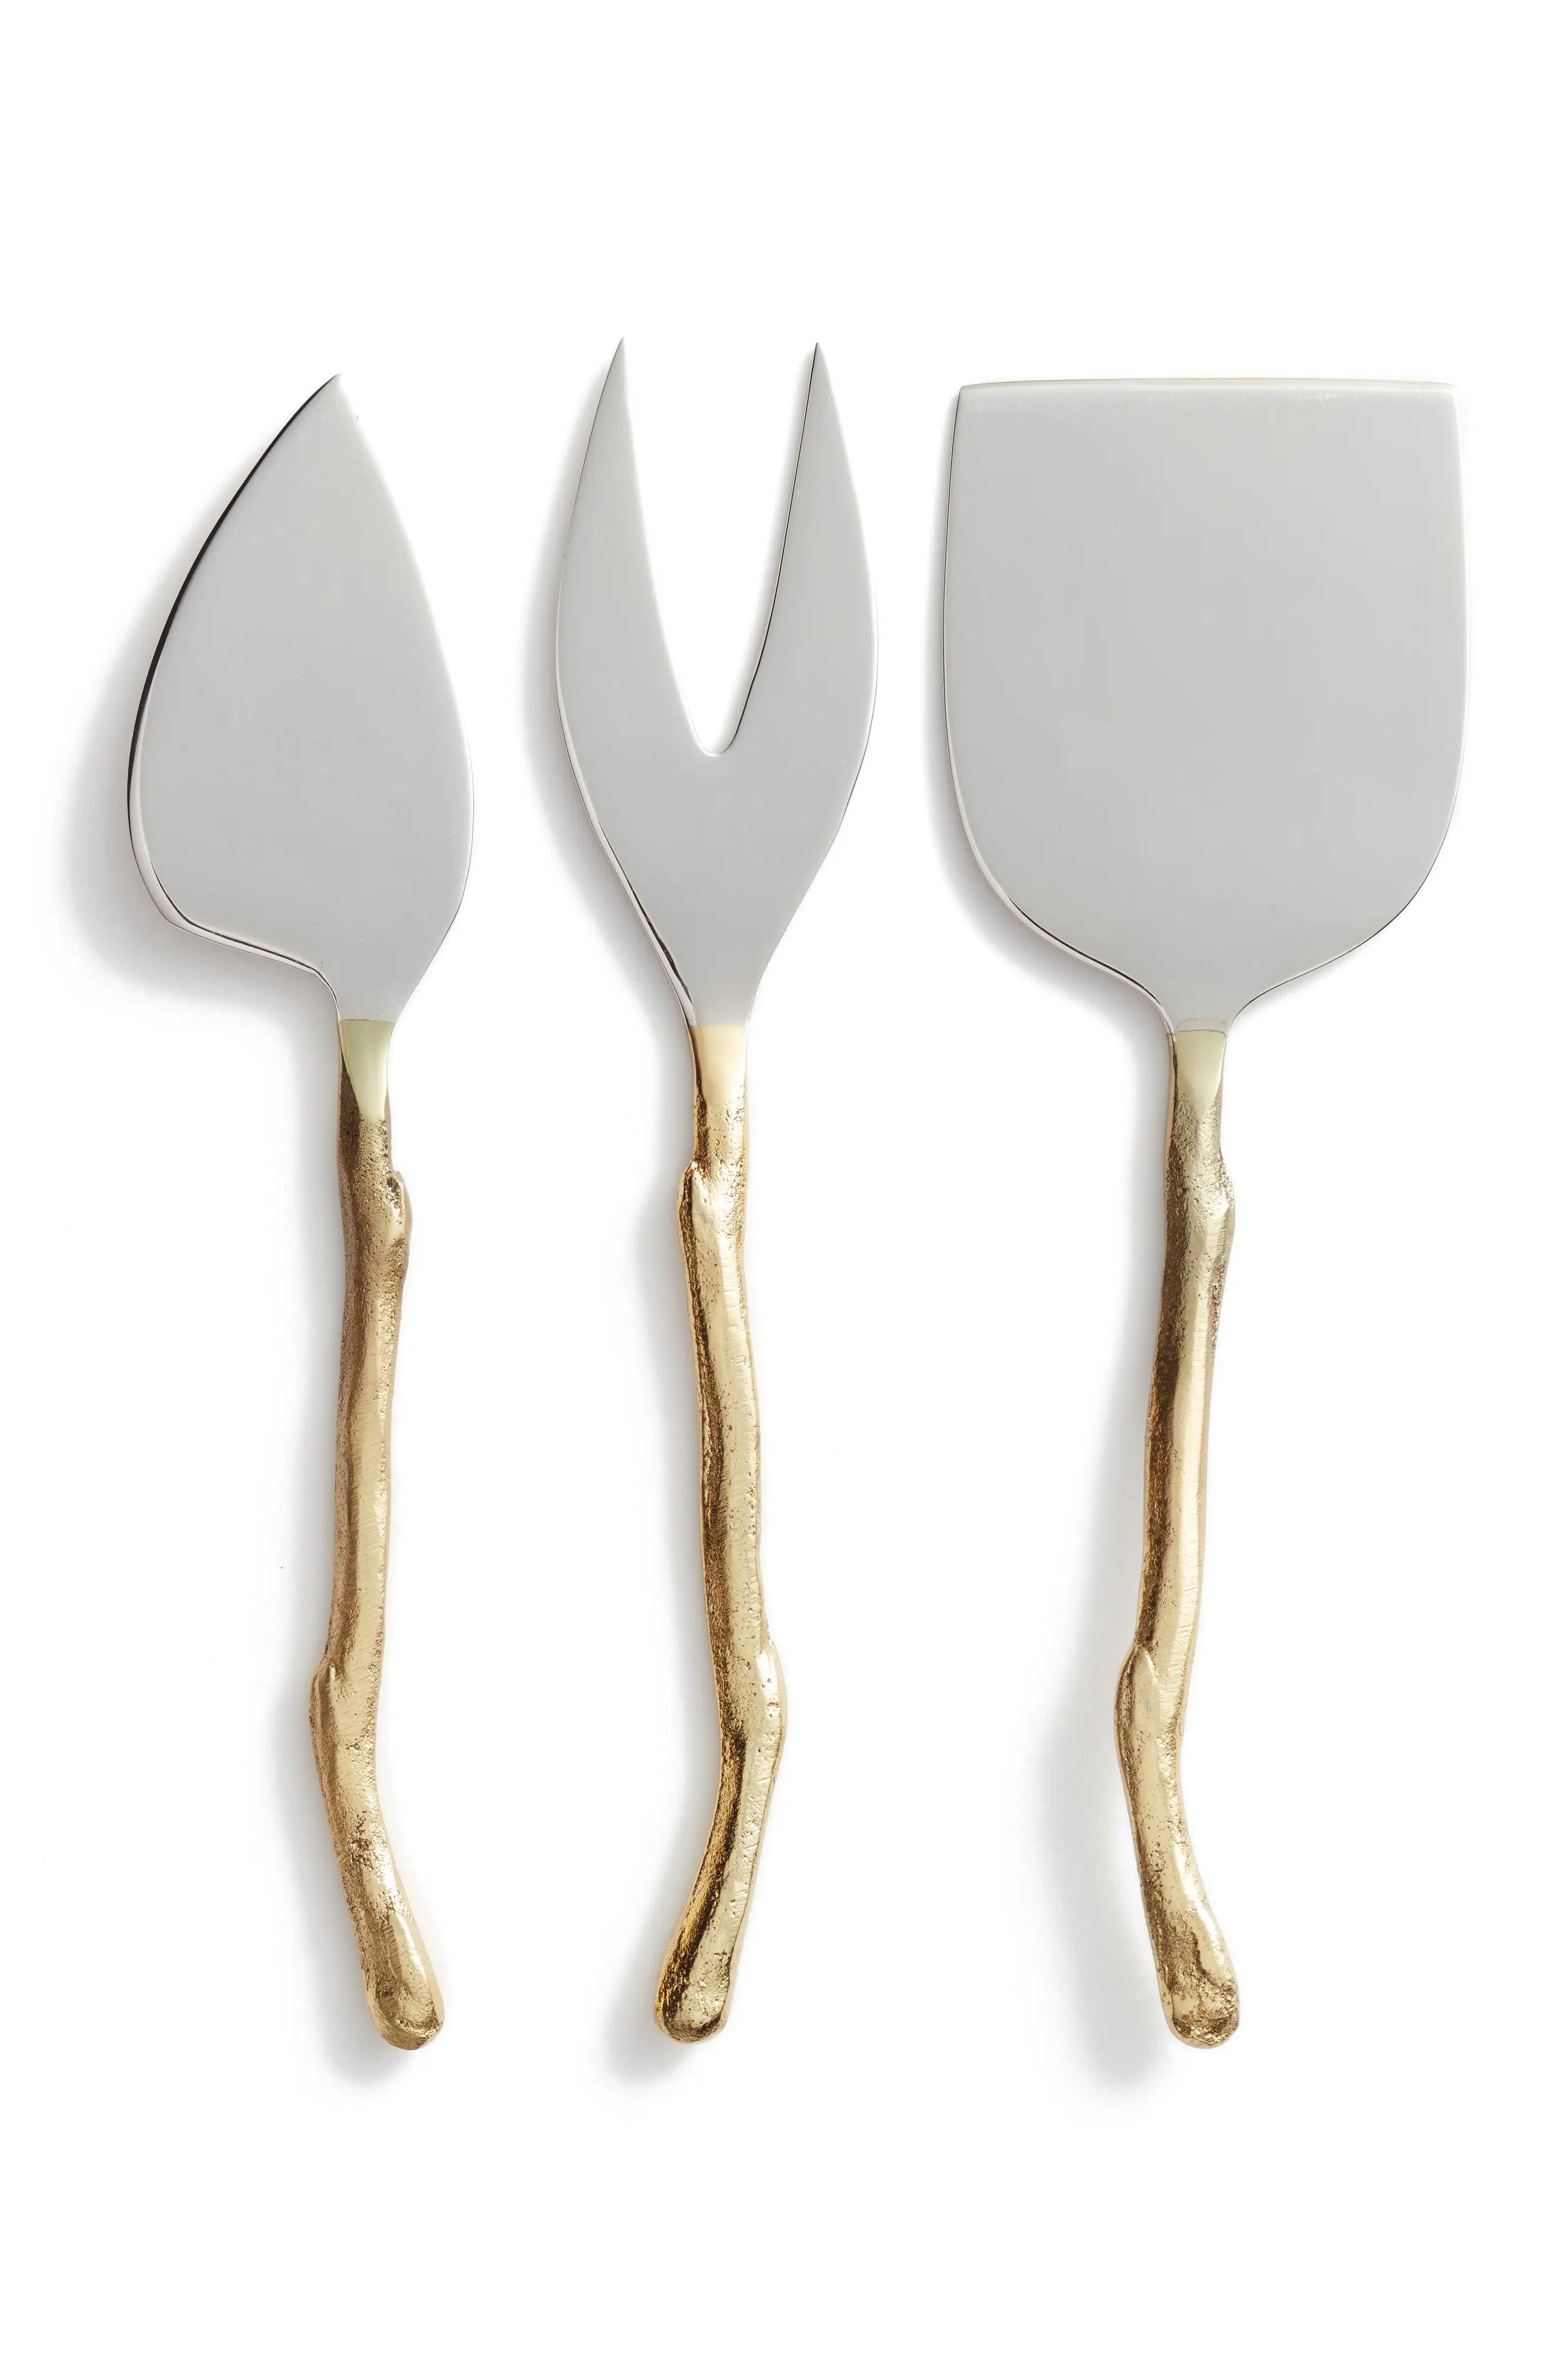 Twig Set of 3 Cheese Knives | Nordstrom